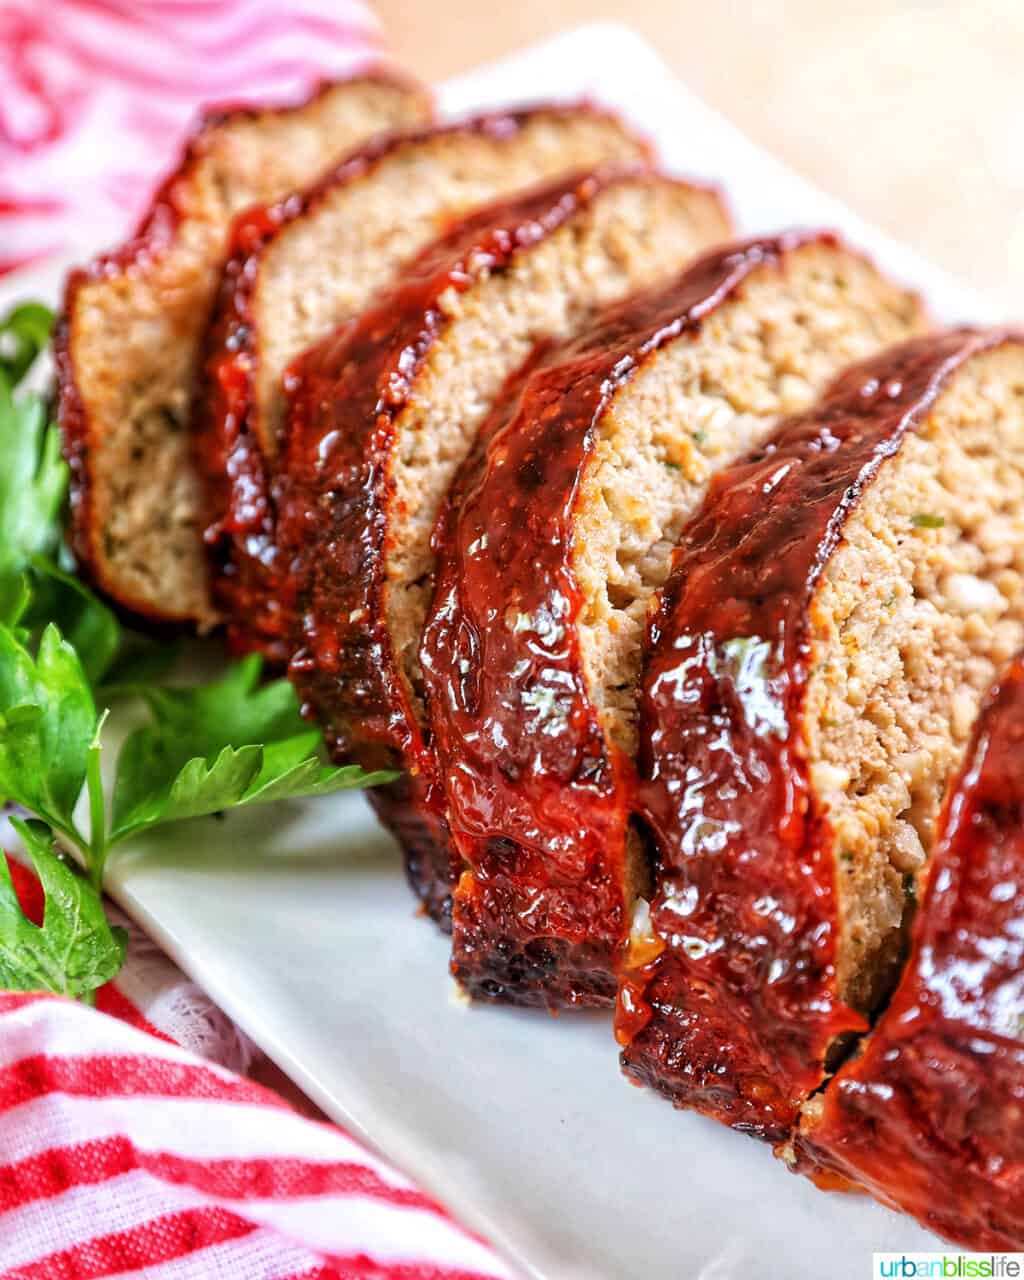 glazed slices of air fryer meatloaf on a white plate with greens and red striped napkin..